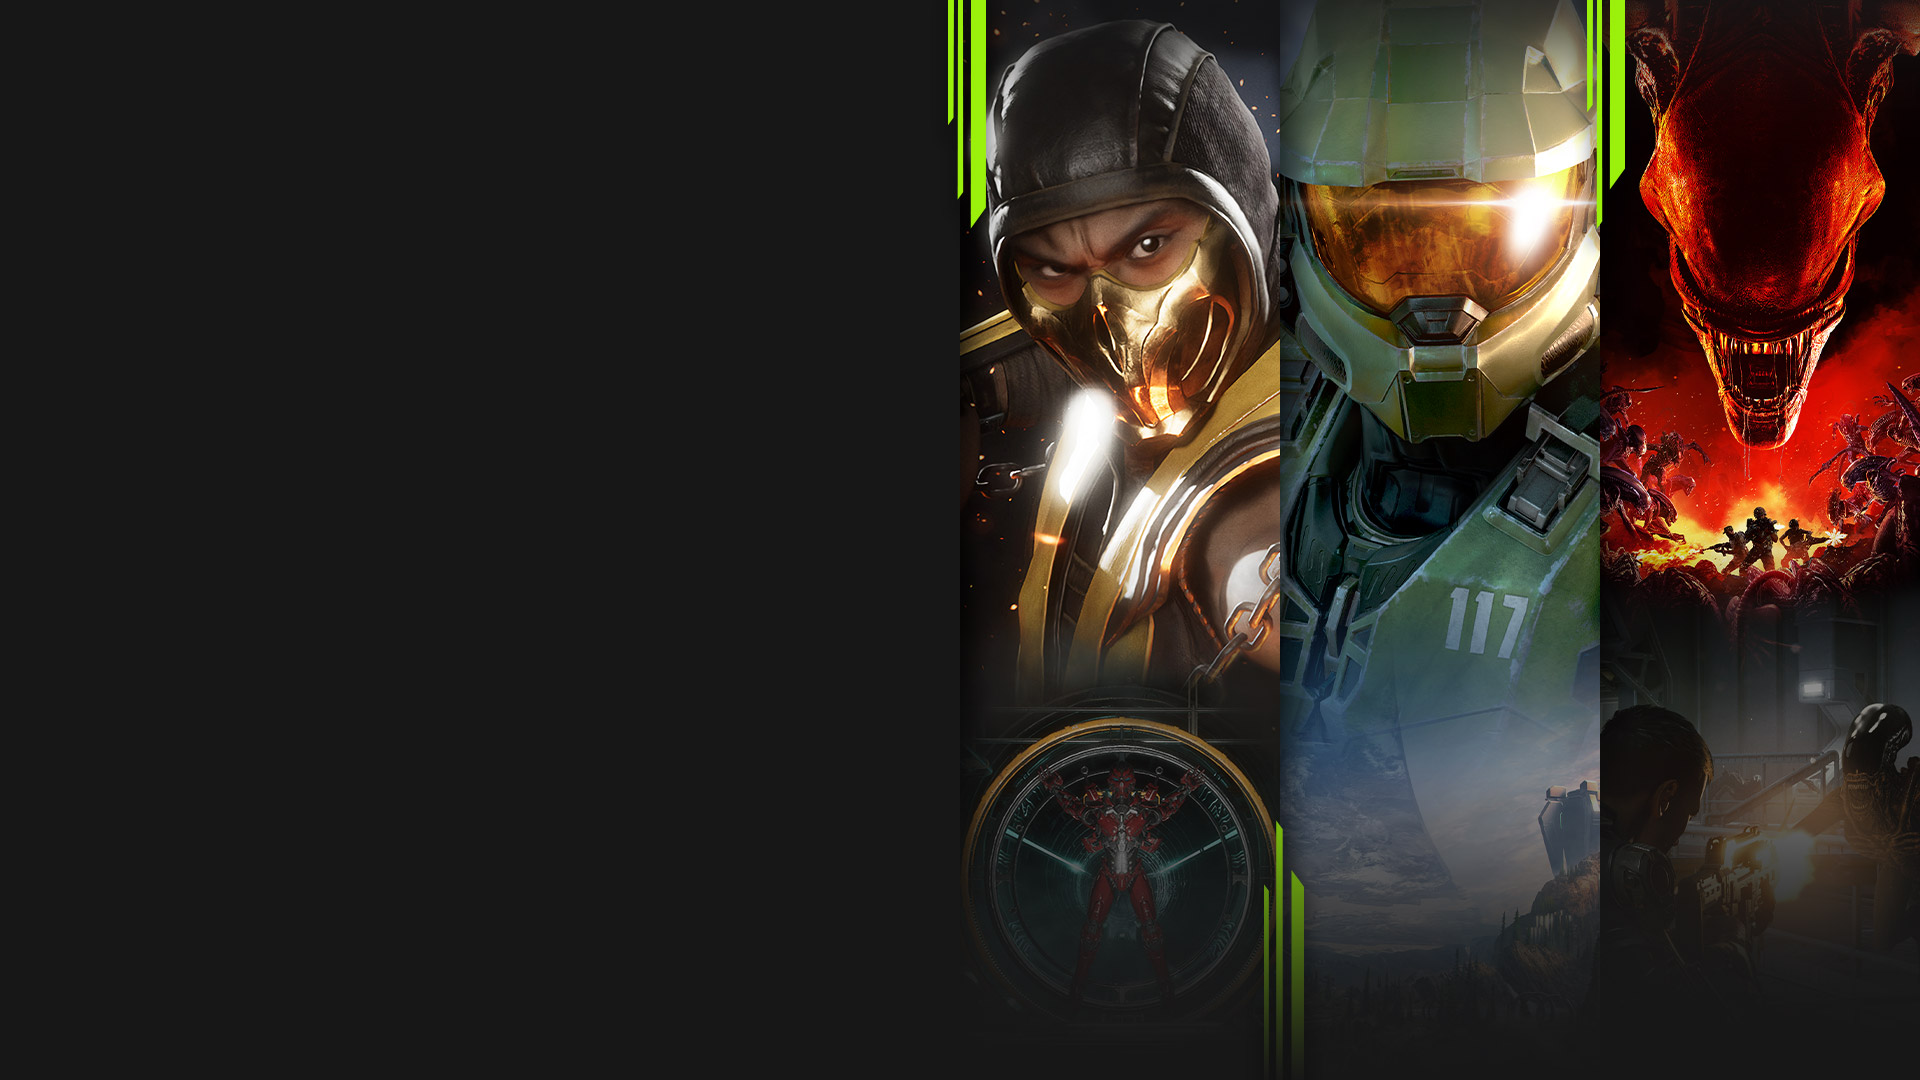 Game art from multiple games available now with Xbox Game Pass including Mortal Kombat 11, Halo Infinite, Aliens: Fireteam Elite, and Warhammer 40,000: Battlesector.